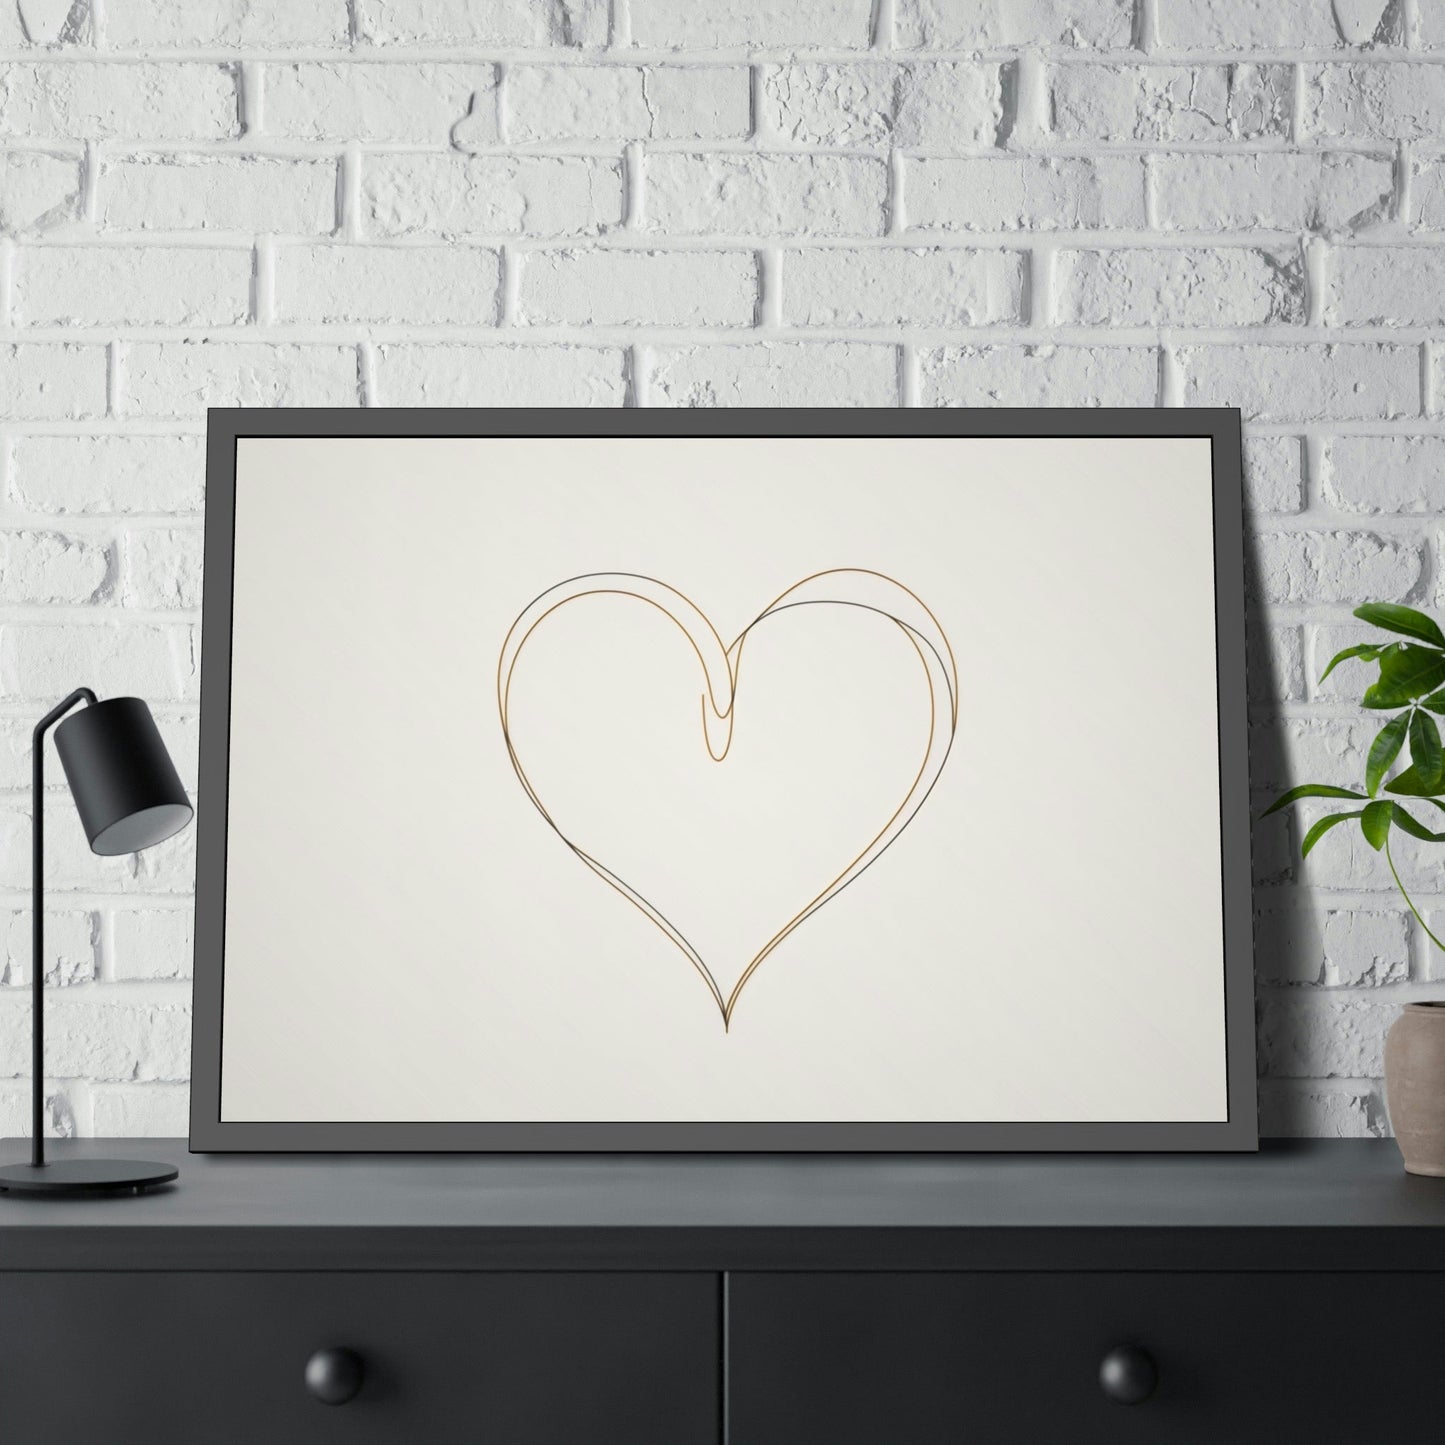 Ethereal Lines: A Canvas & Poster Print of an Abstract Line Art